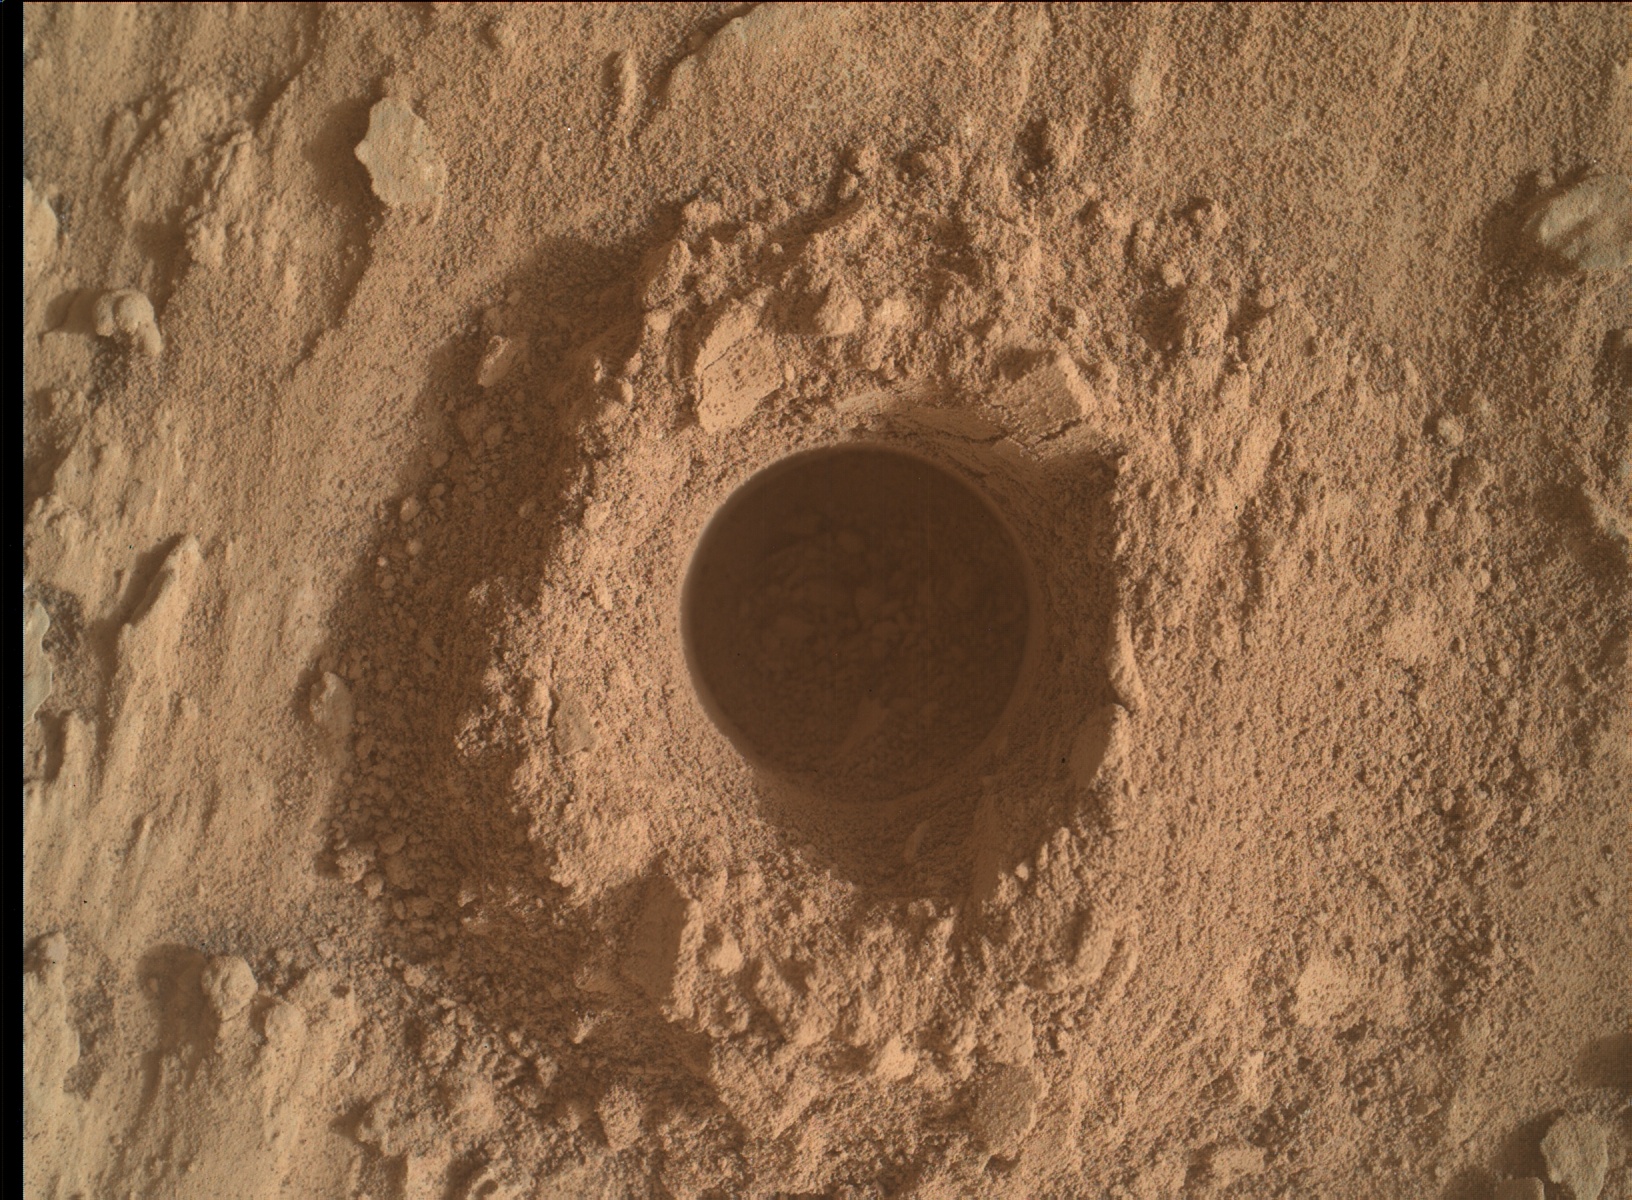 Nasa's Mars rover Curiosity acquired this image using its Mars Hand Lens Imager (MAHLI) on Sol 3528